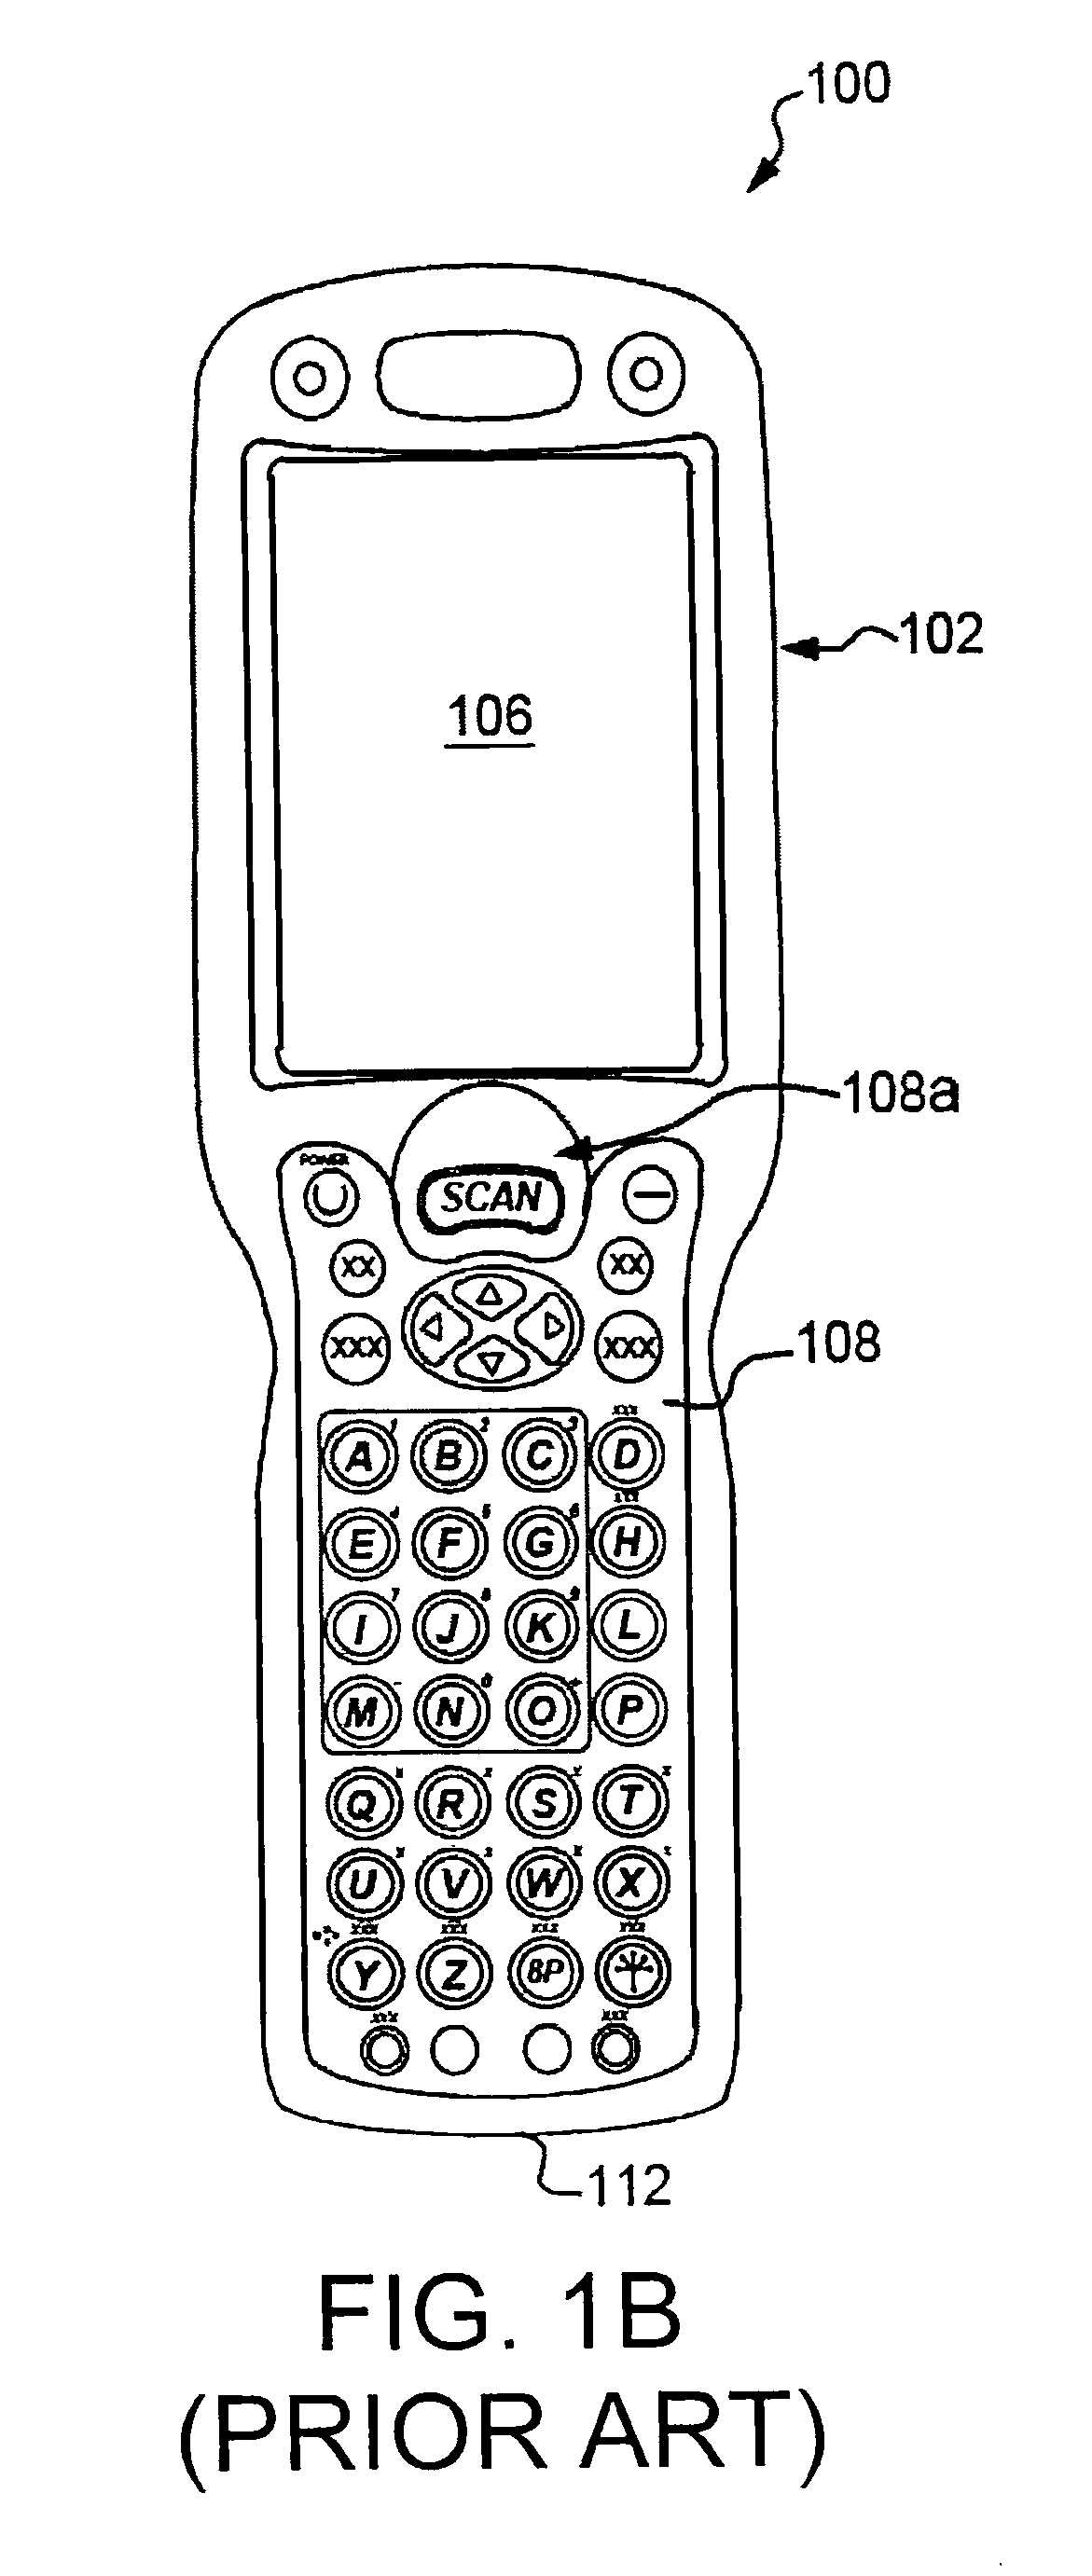 Apparatus and methods for monitoring one or more portable data terminals